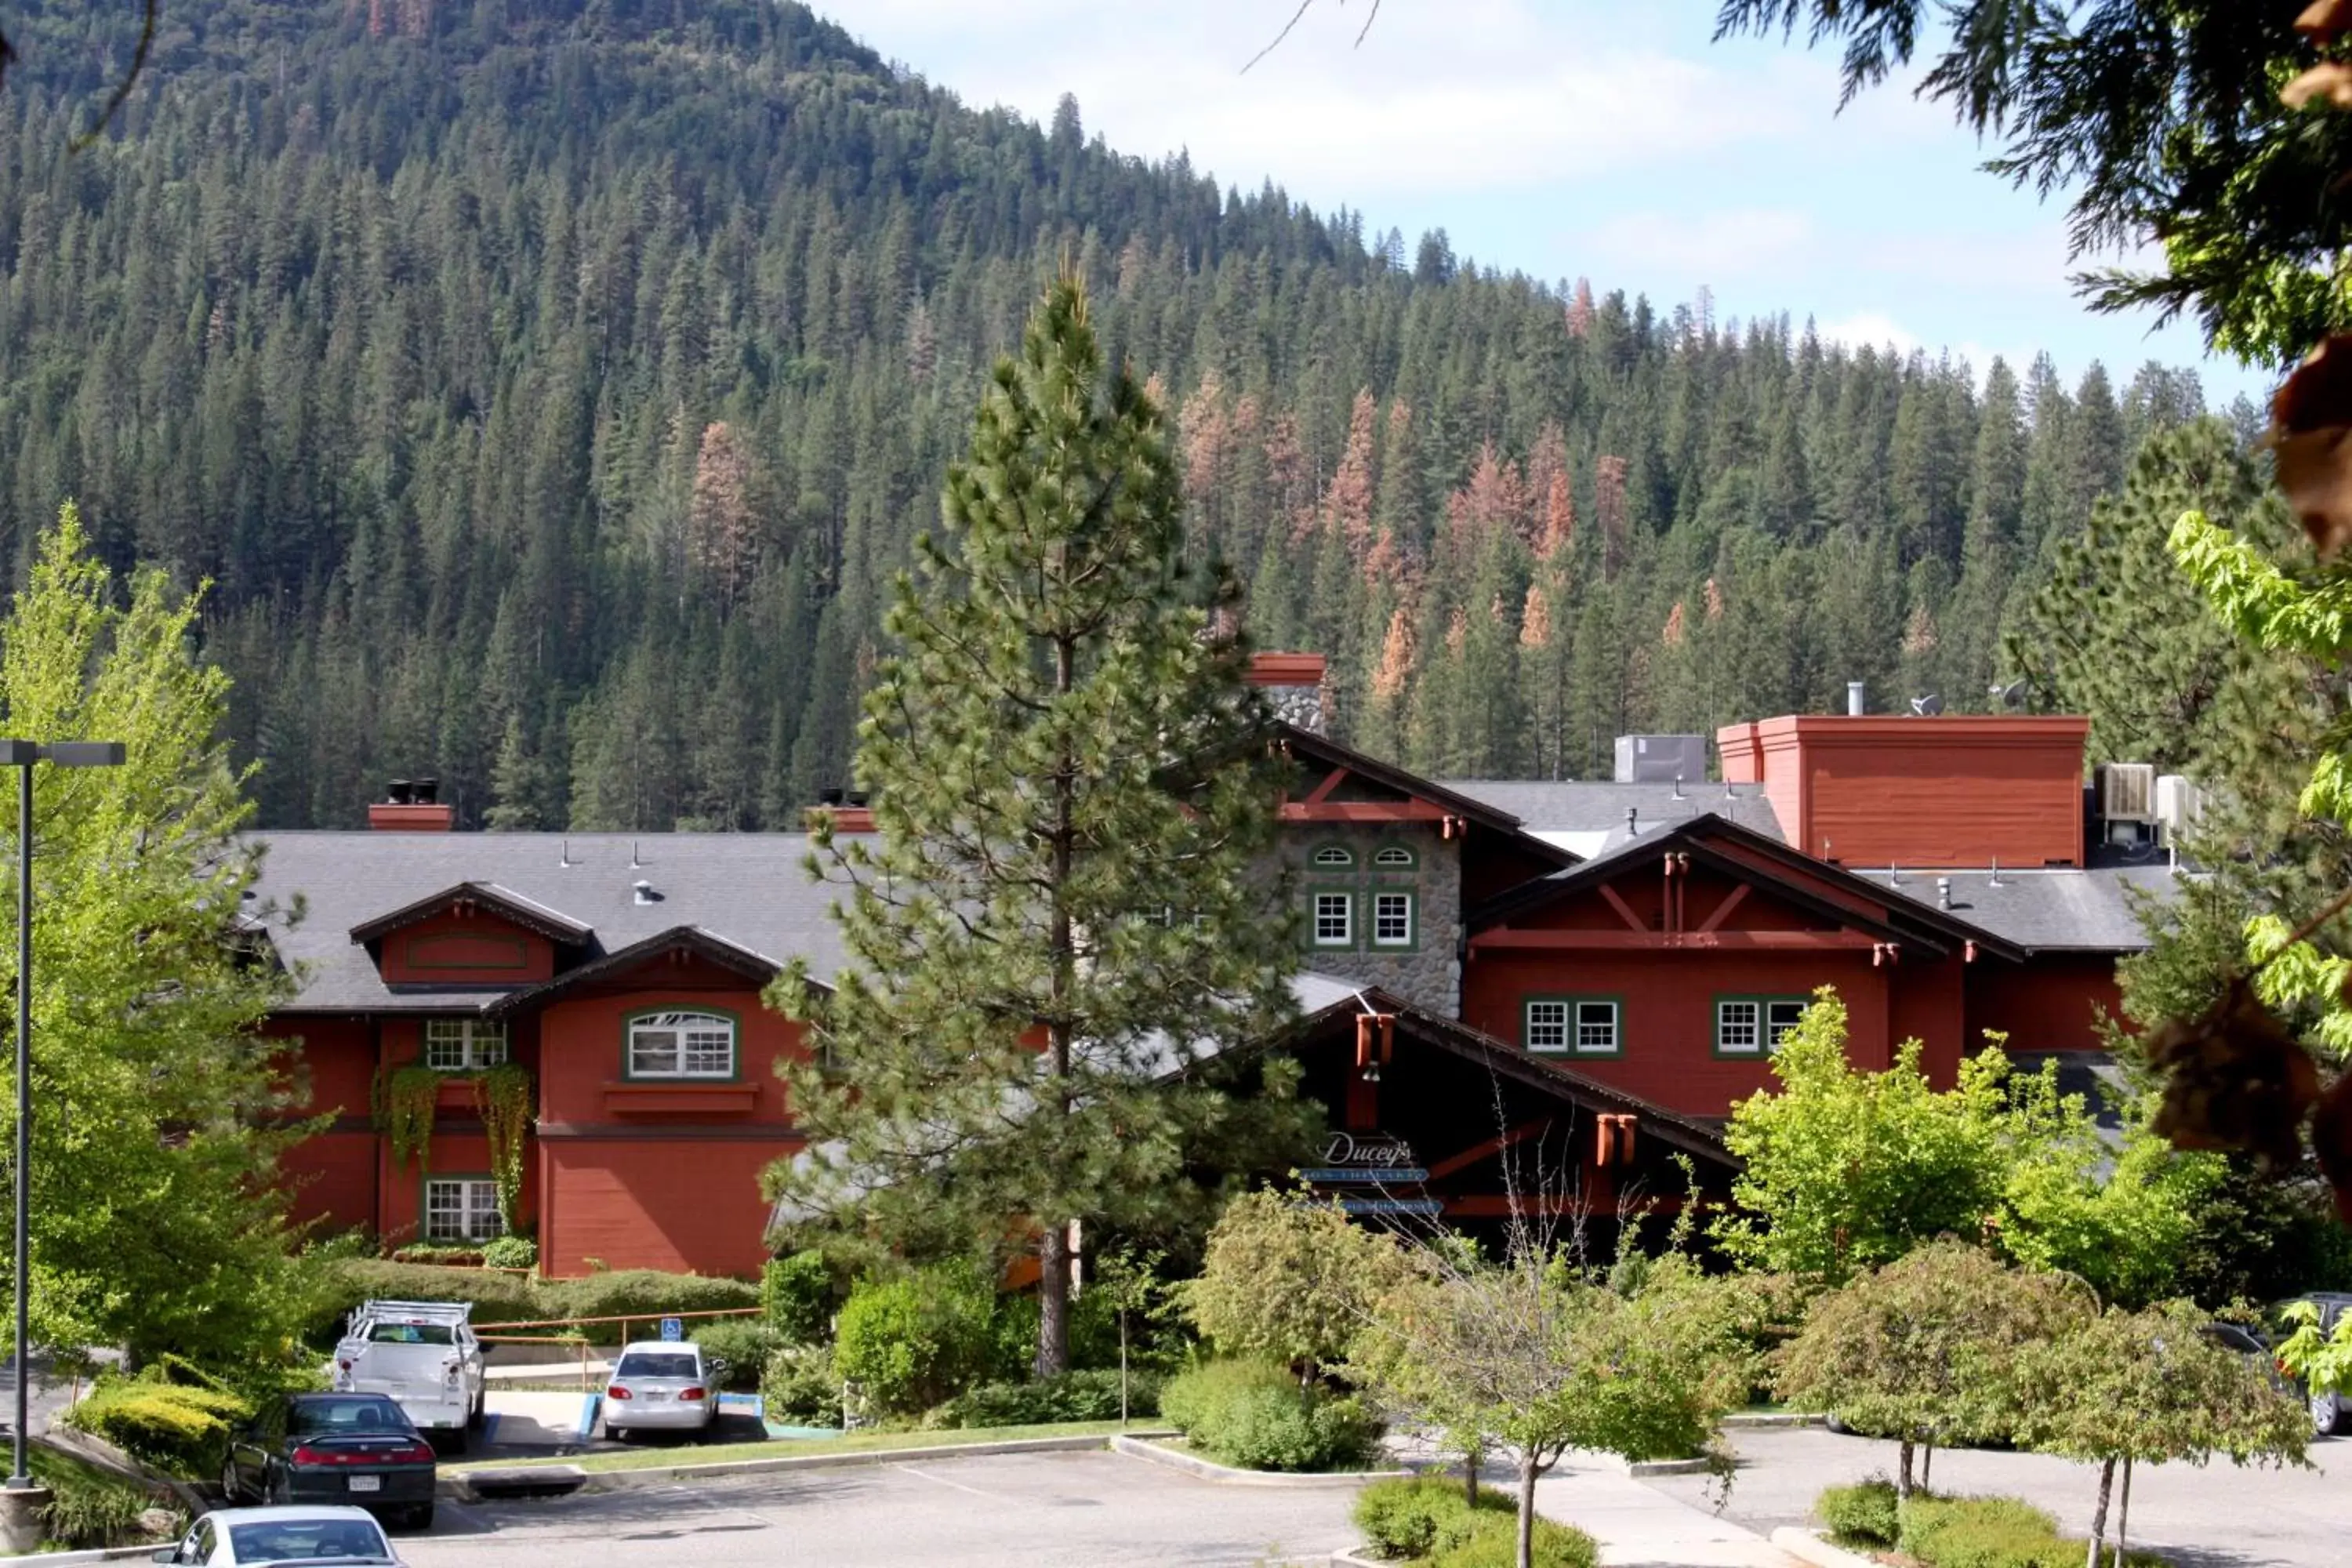 Property Building in The Pines Resort & Conference Center